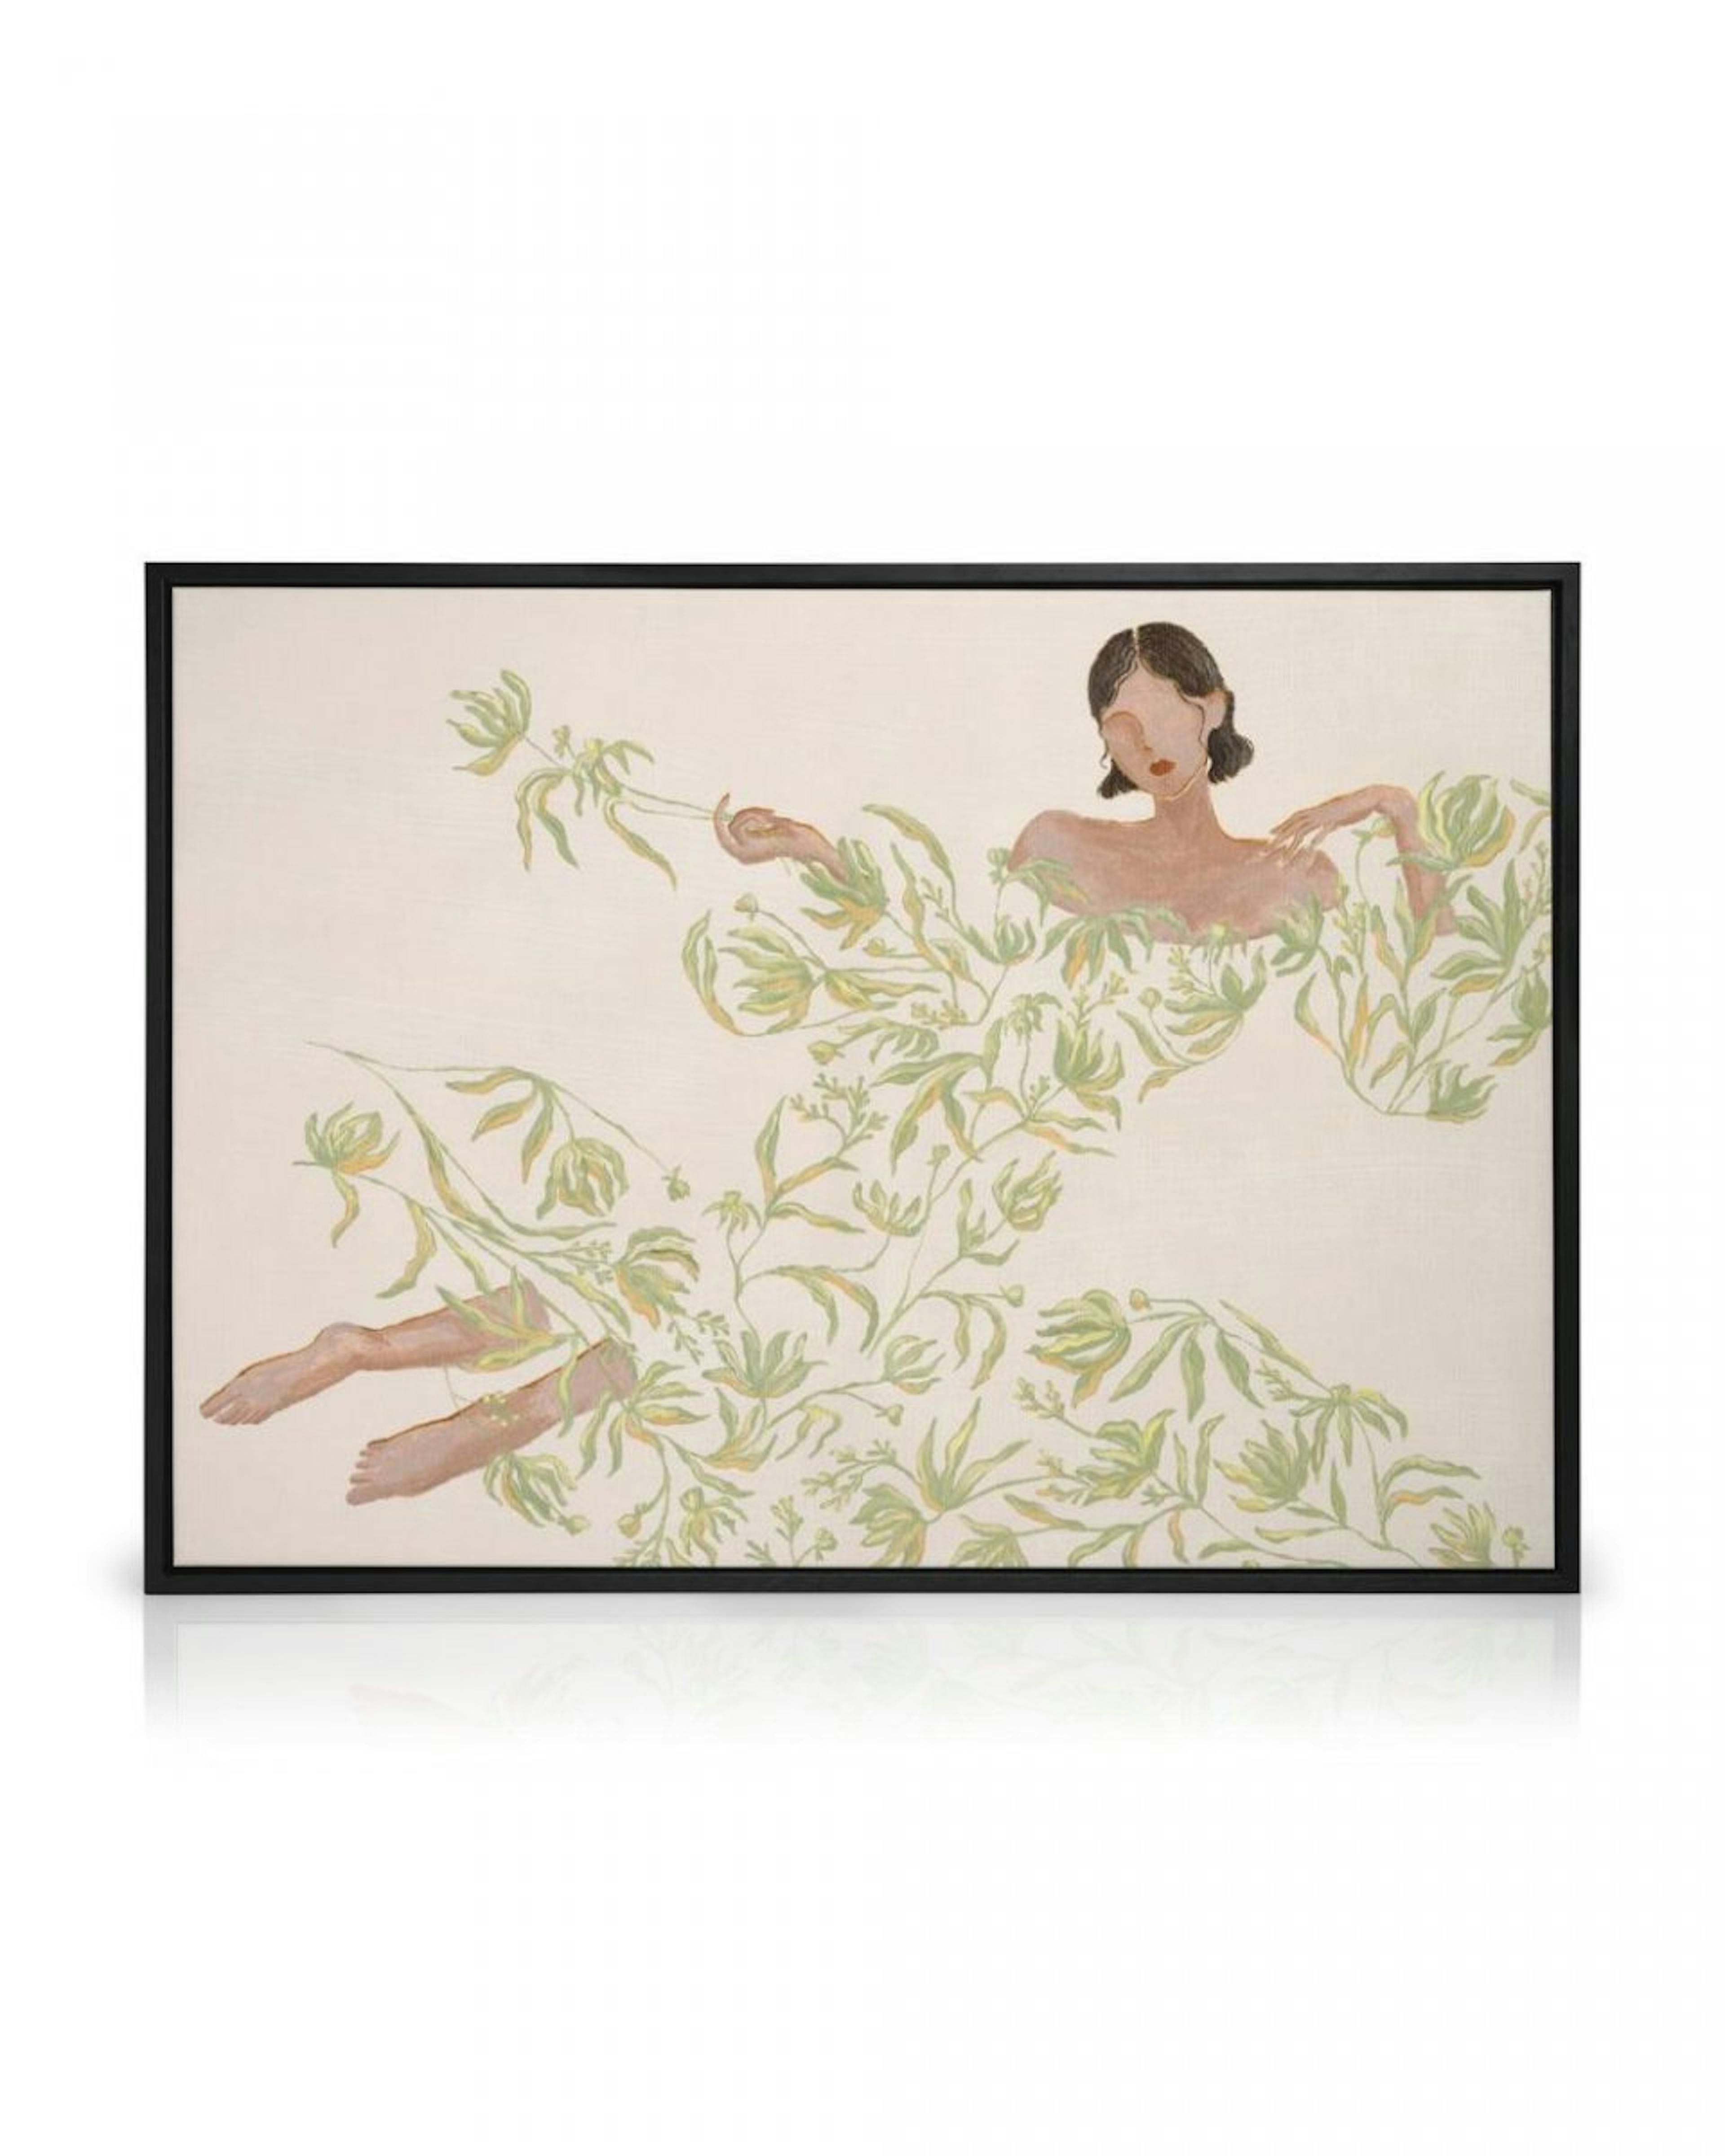 Lady in Green Floral Dress Canvas